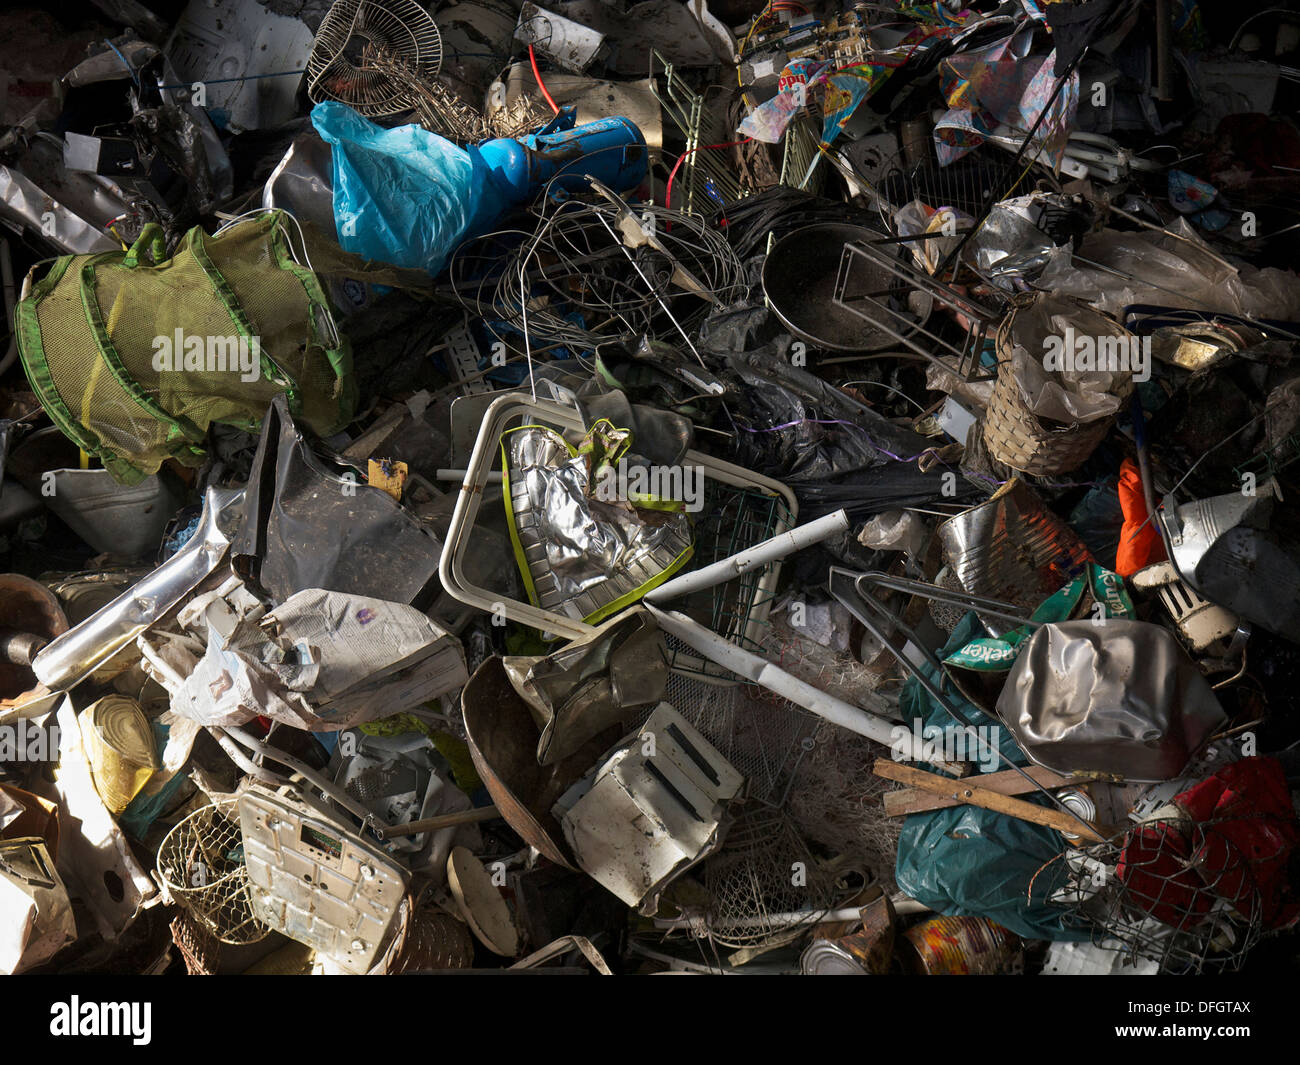 First step in recycling household waste is the separation of large items, seen here. Stock Photo